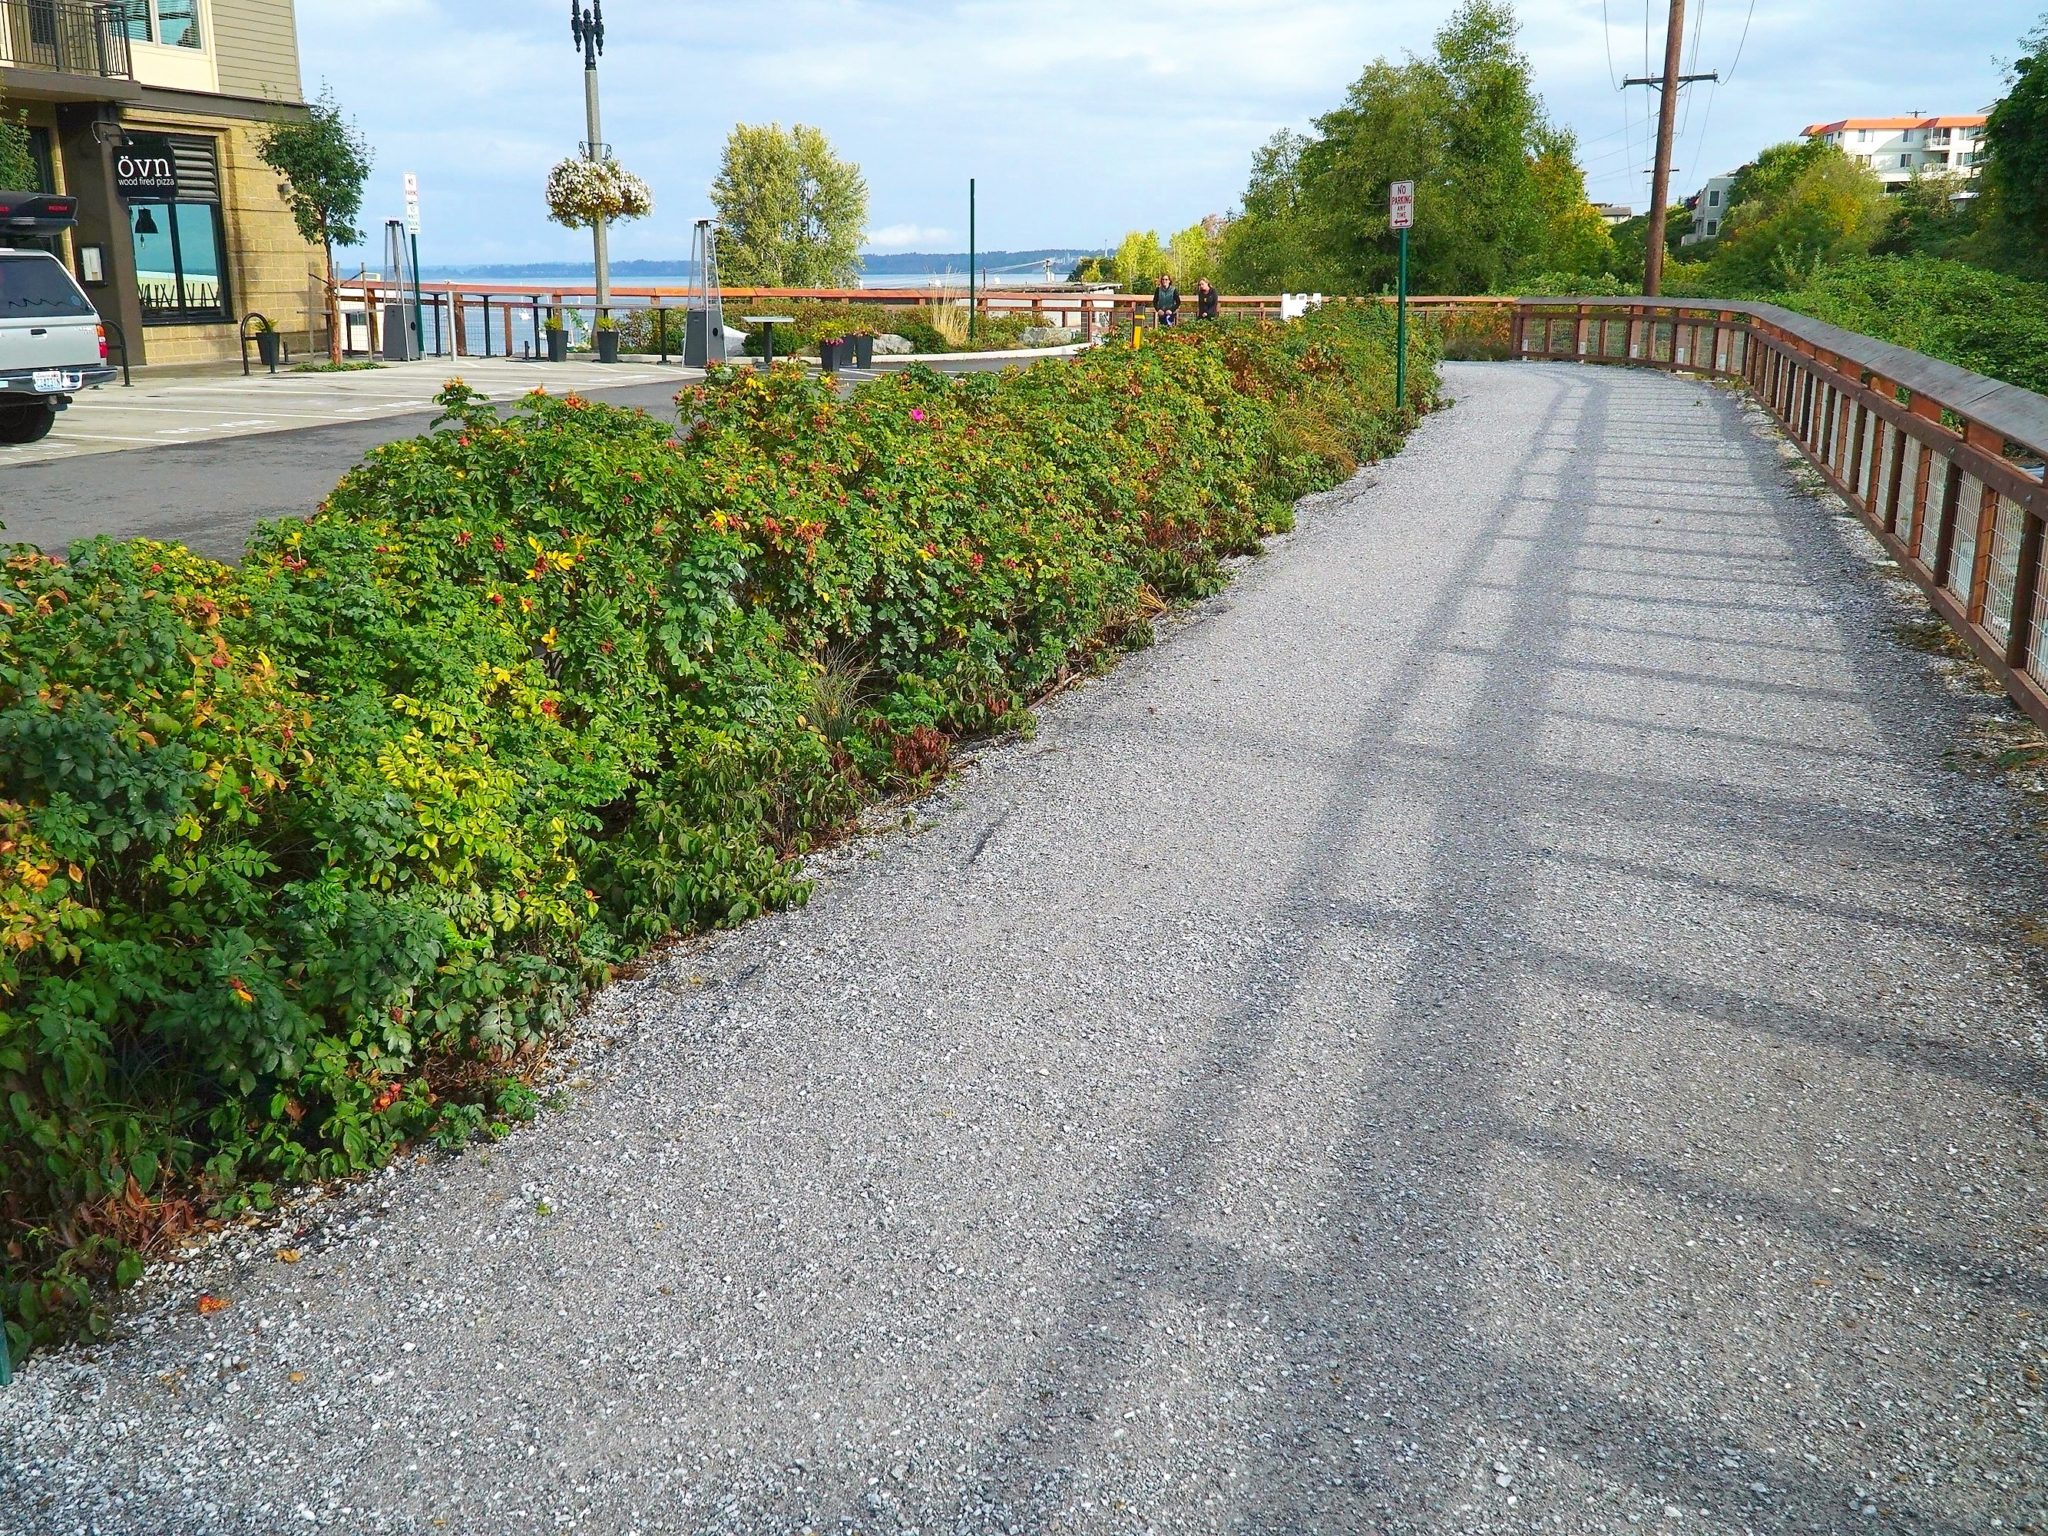 The gravel trail surface is too hard to soak up rainwater, so the runoff flows off the gravel instead and into the linear rain garden on the left.